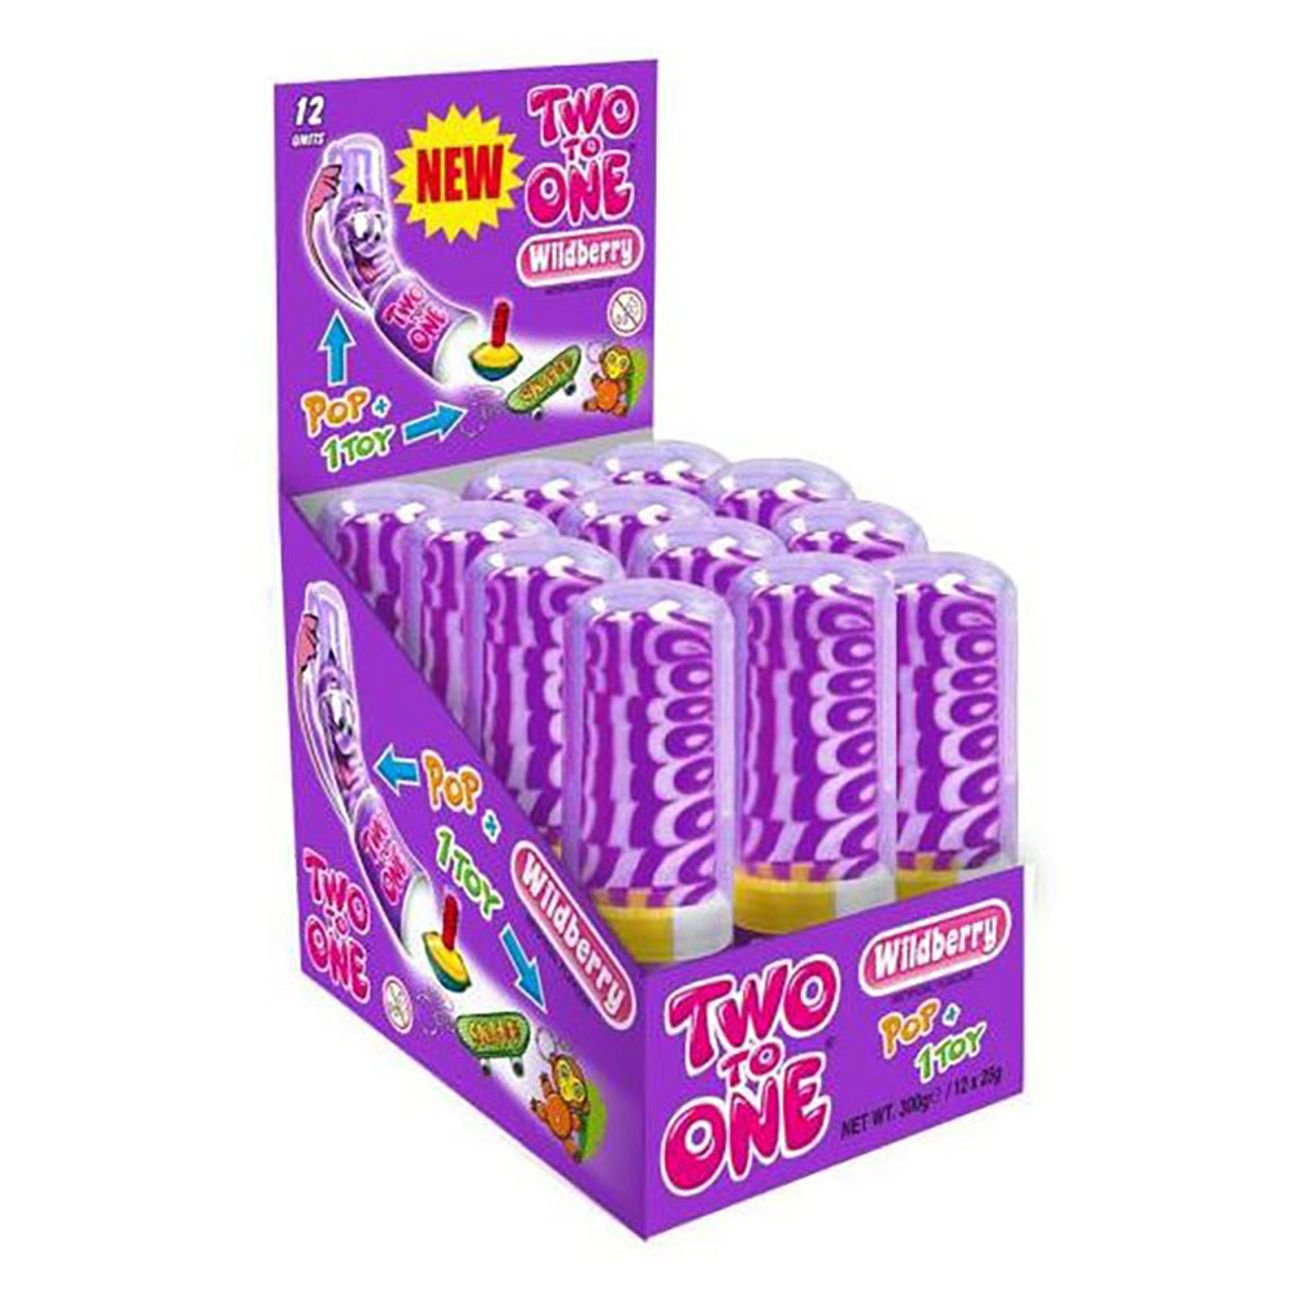 two-to-one-wildberry-25g-82920-1